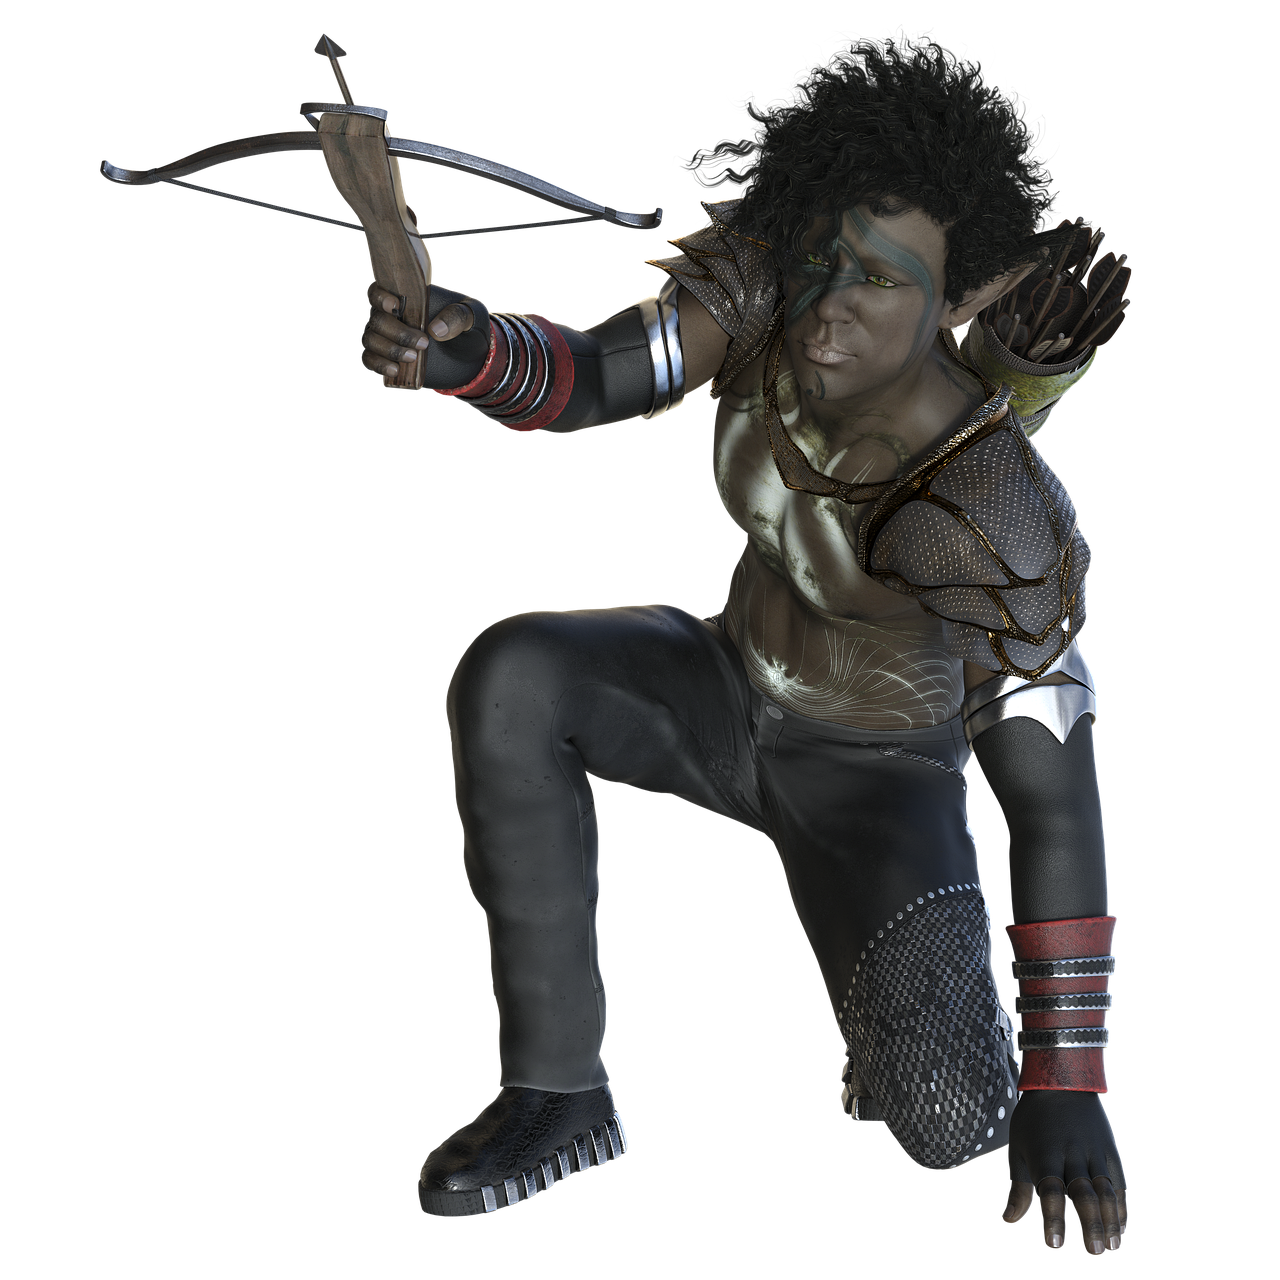 a close up of a person holding a bow and arrow, a 3D render, inspired by Anthony Palumbo, afrofuturism, posing ready for a fight, black man with afro hair, kneeling, strong fighter in leathers